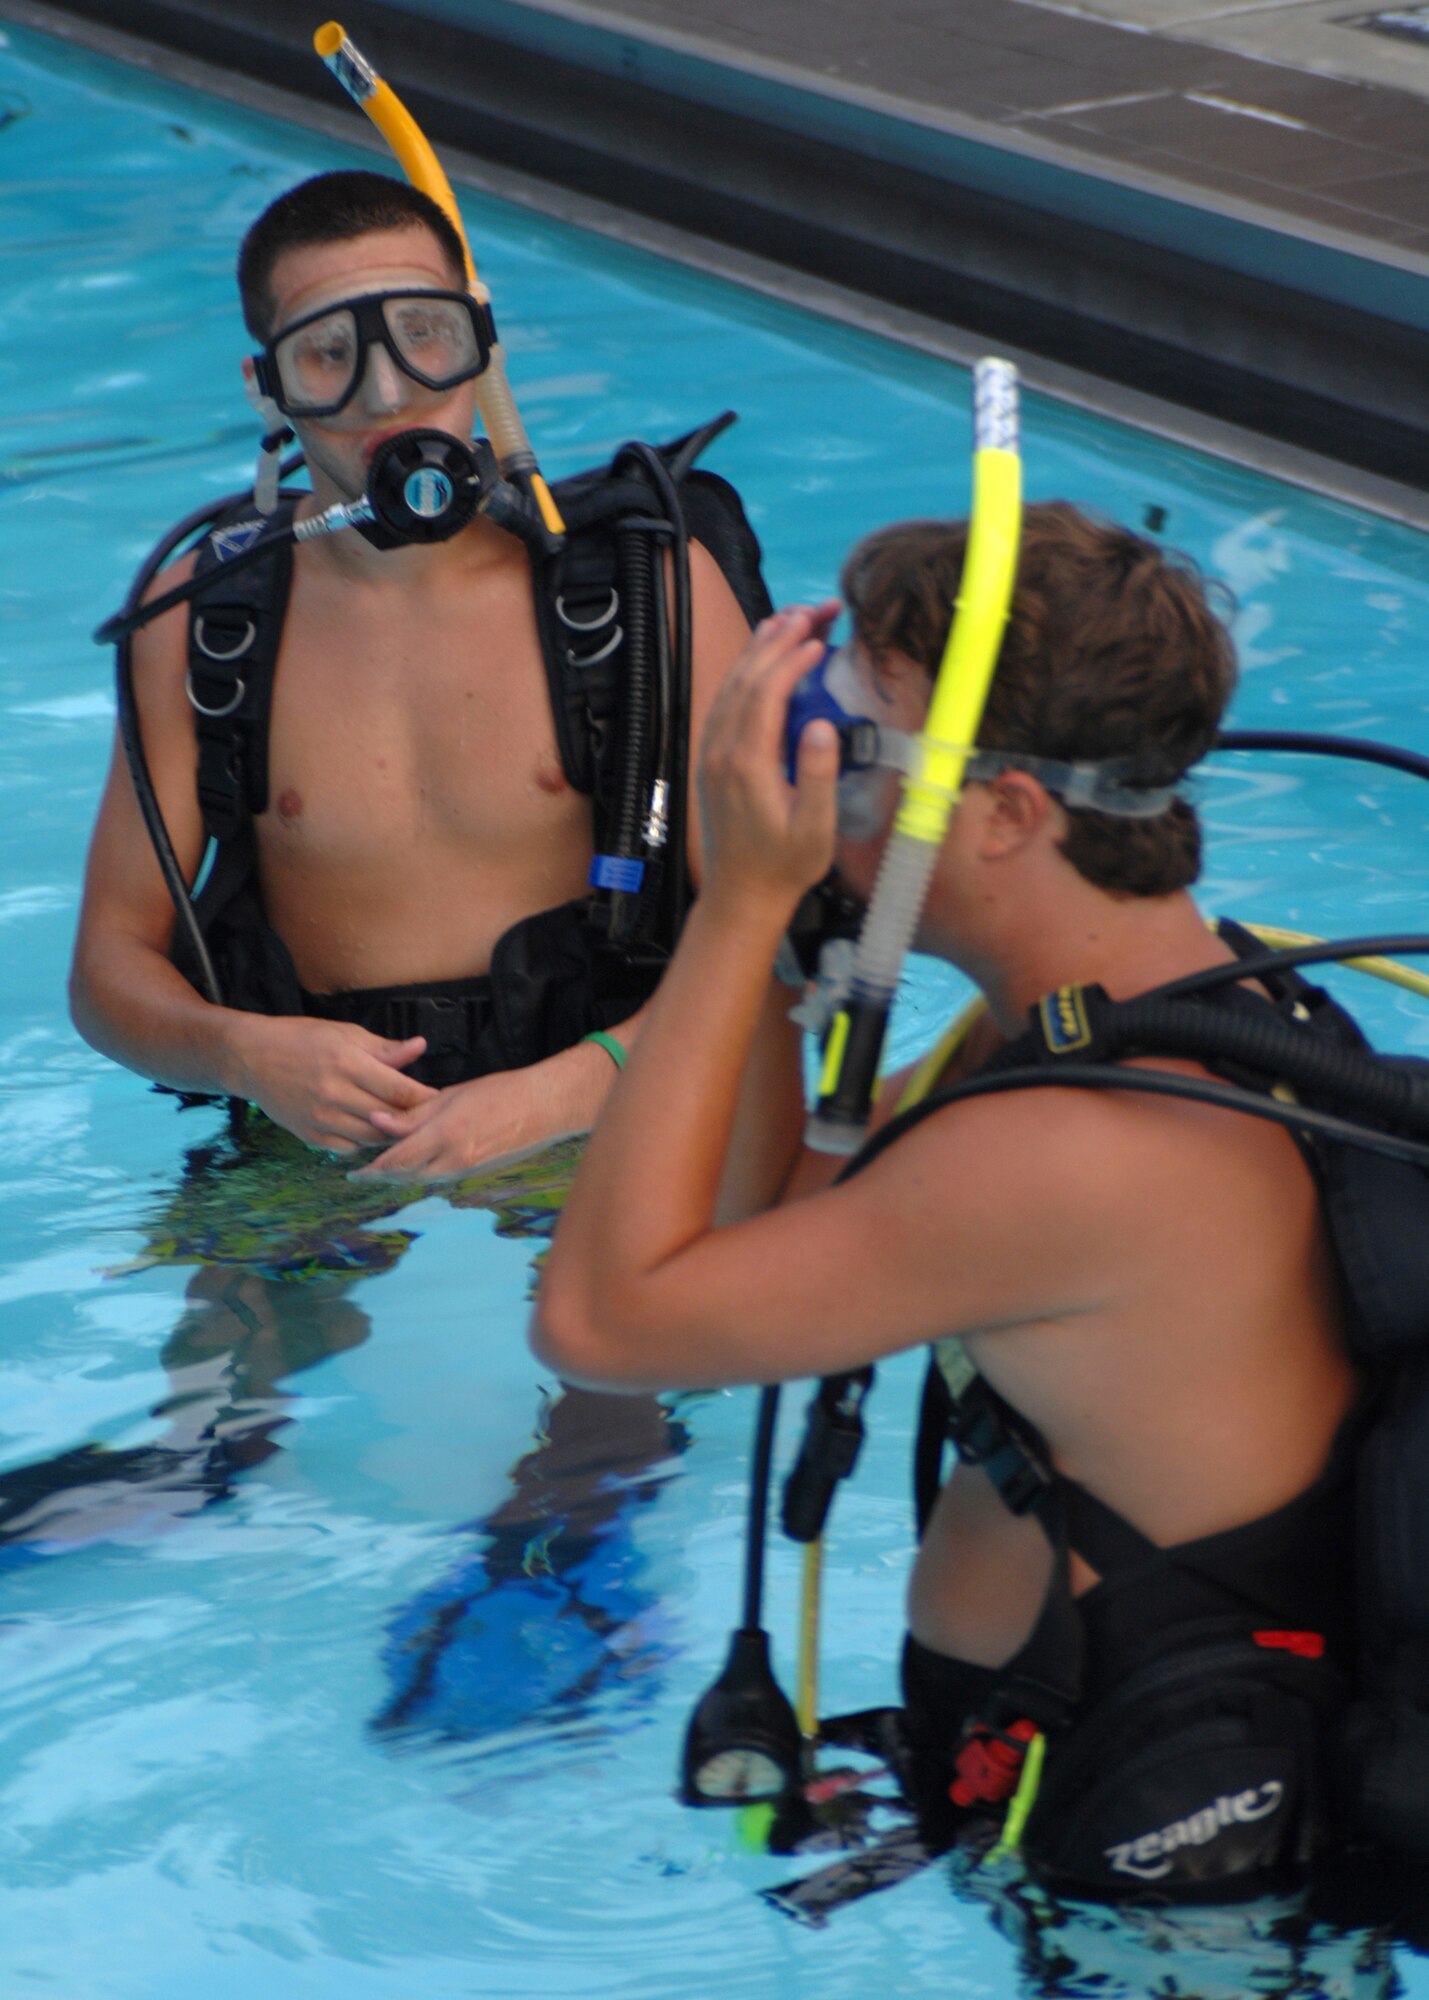 SEYMOUR JOHNSON AIR FORCE BASE, N.C. - Participants in the open water SCUBA ceritfication course prepare to make their first dive, July 25. During the 7-day course participants learn fundamentals of scuba diving, including dive equipment and techniques. (U.S. Air Force photo by Airman 1st Class Greg Biondo)